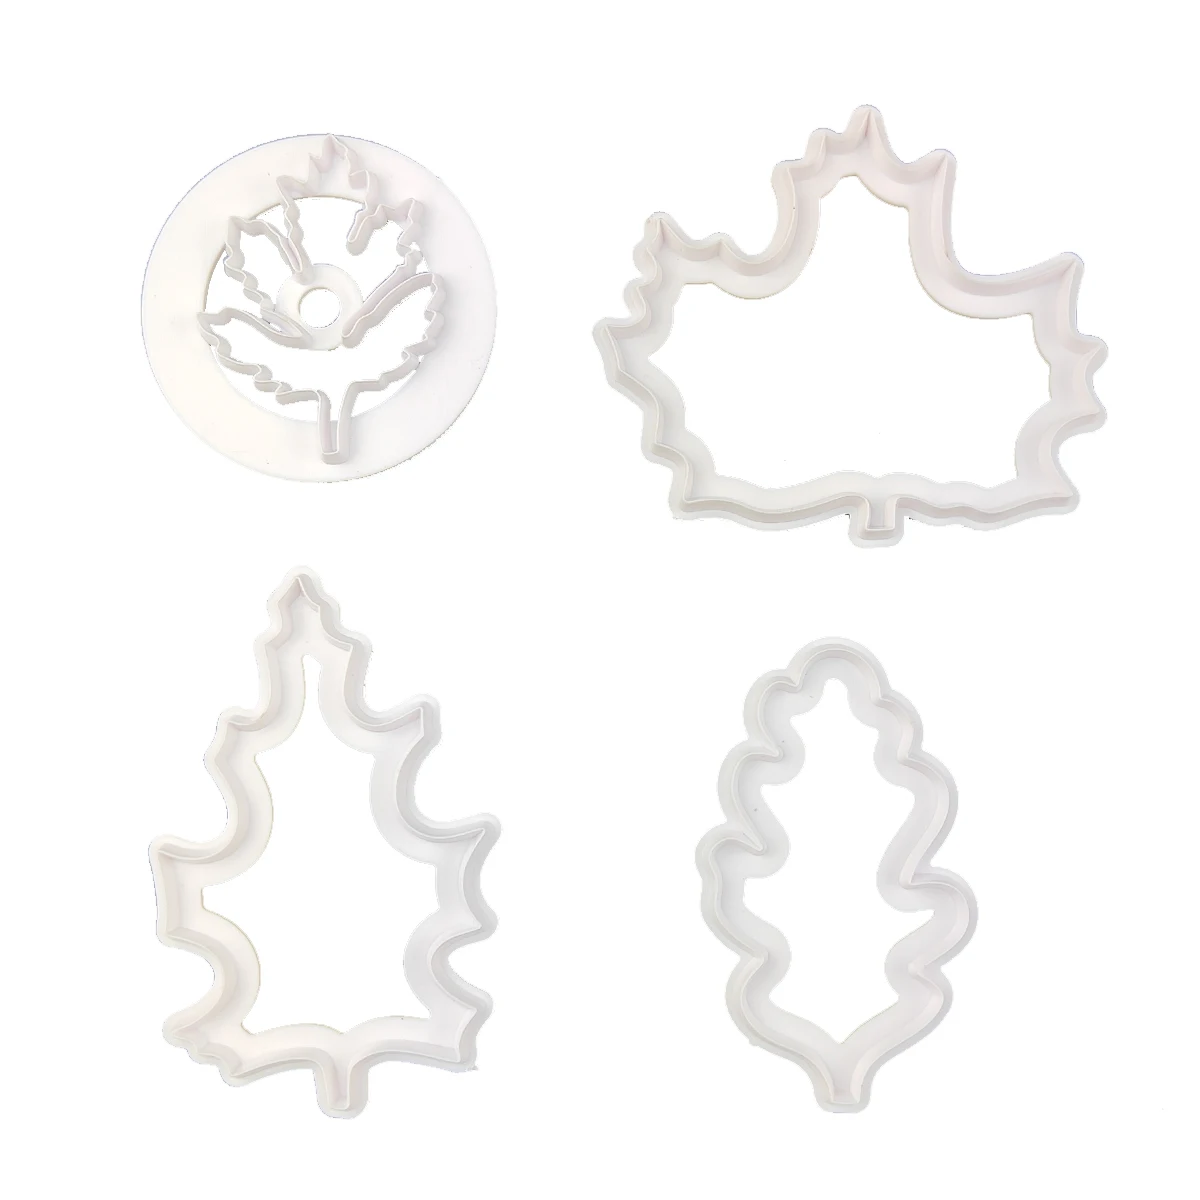 

4Pcs Maple Leaves Leaf Fudge Cookie Cutters Moulds Fondant Biscuit Pastry Cake Forms Christmas Kitchen Baking Decorating Tools